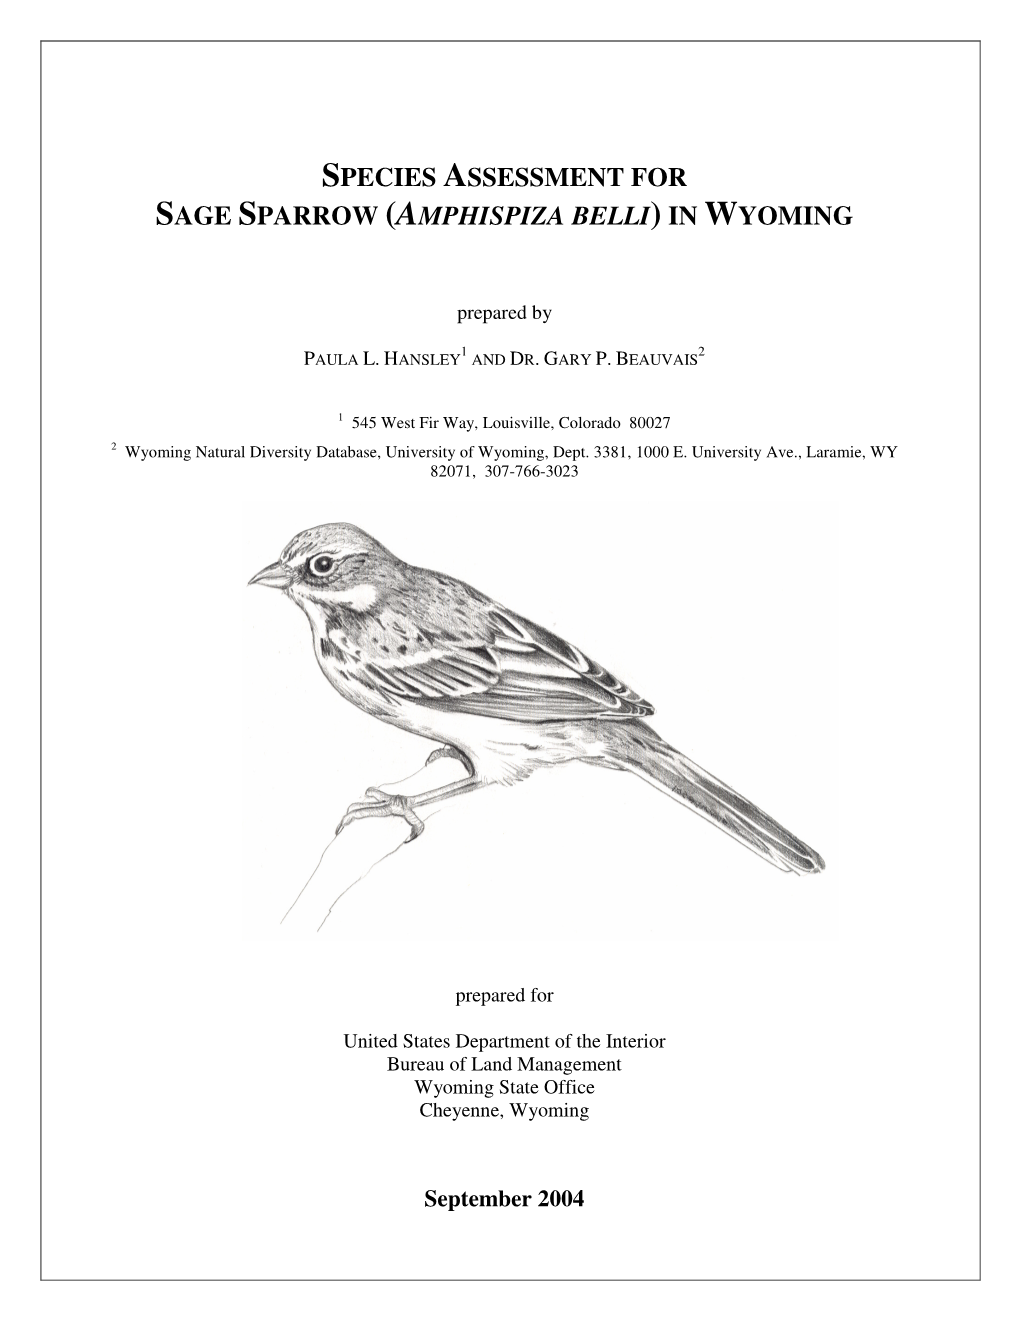 Species Assessment for Sage Sparrow (Amphispiza Belli) in Wyoming